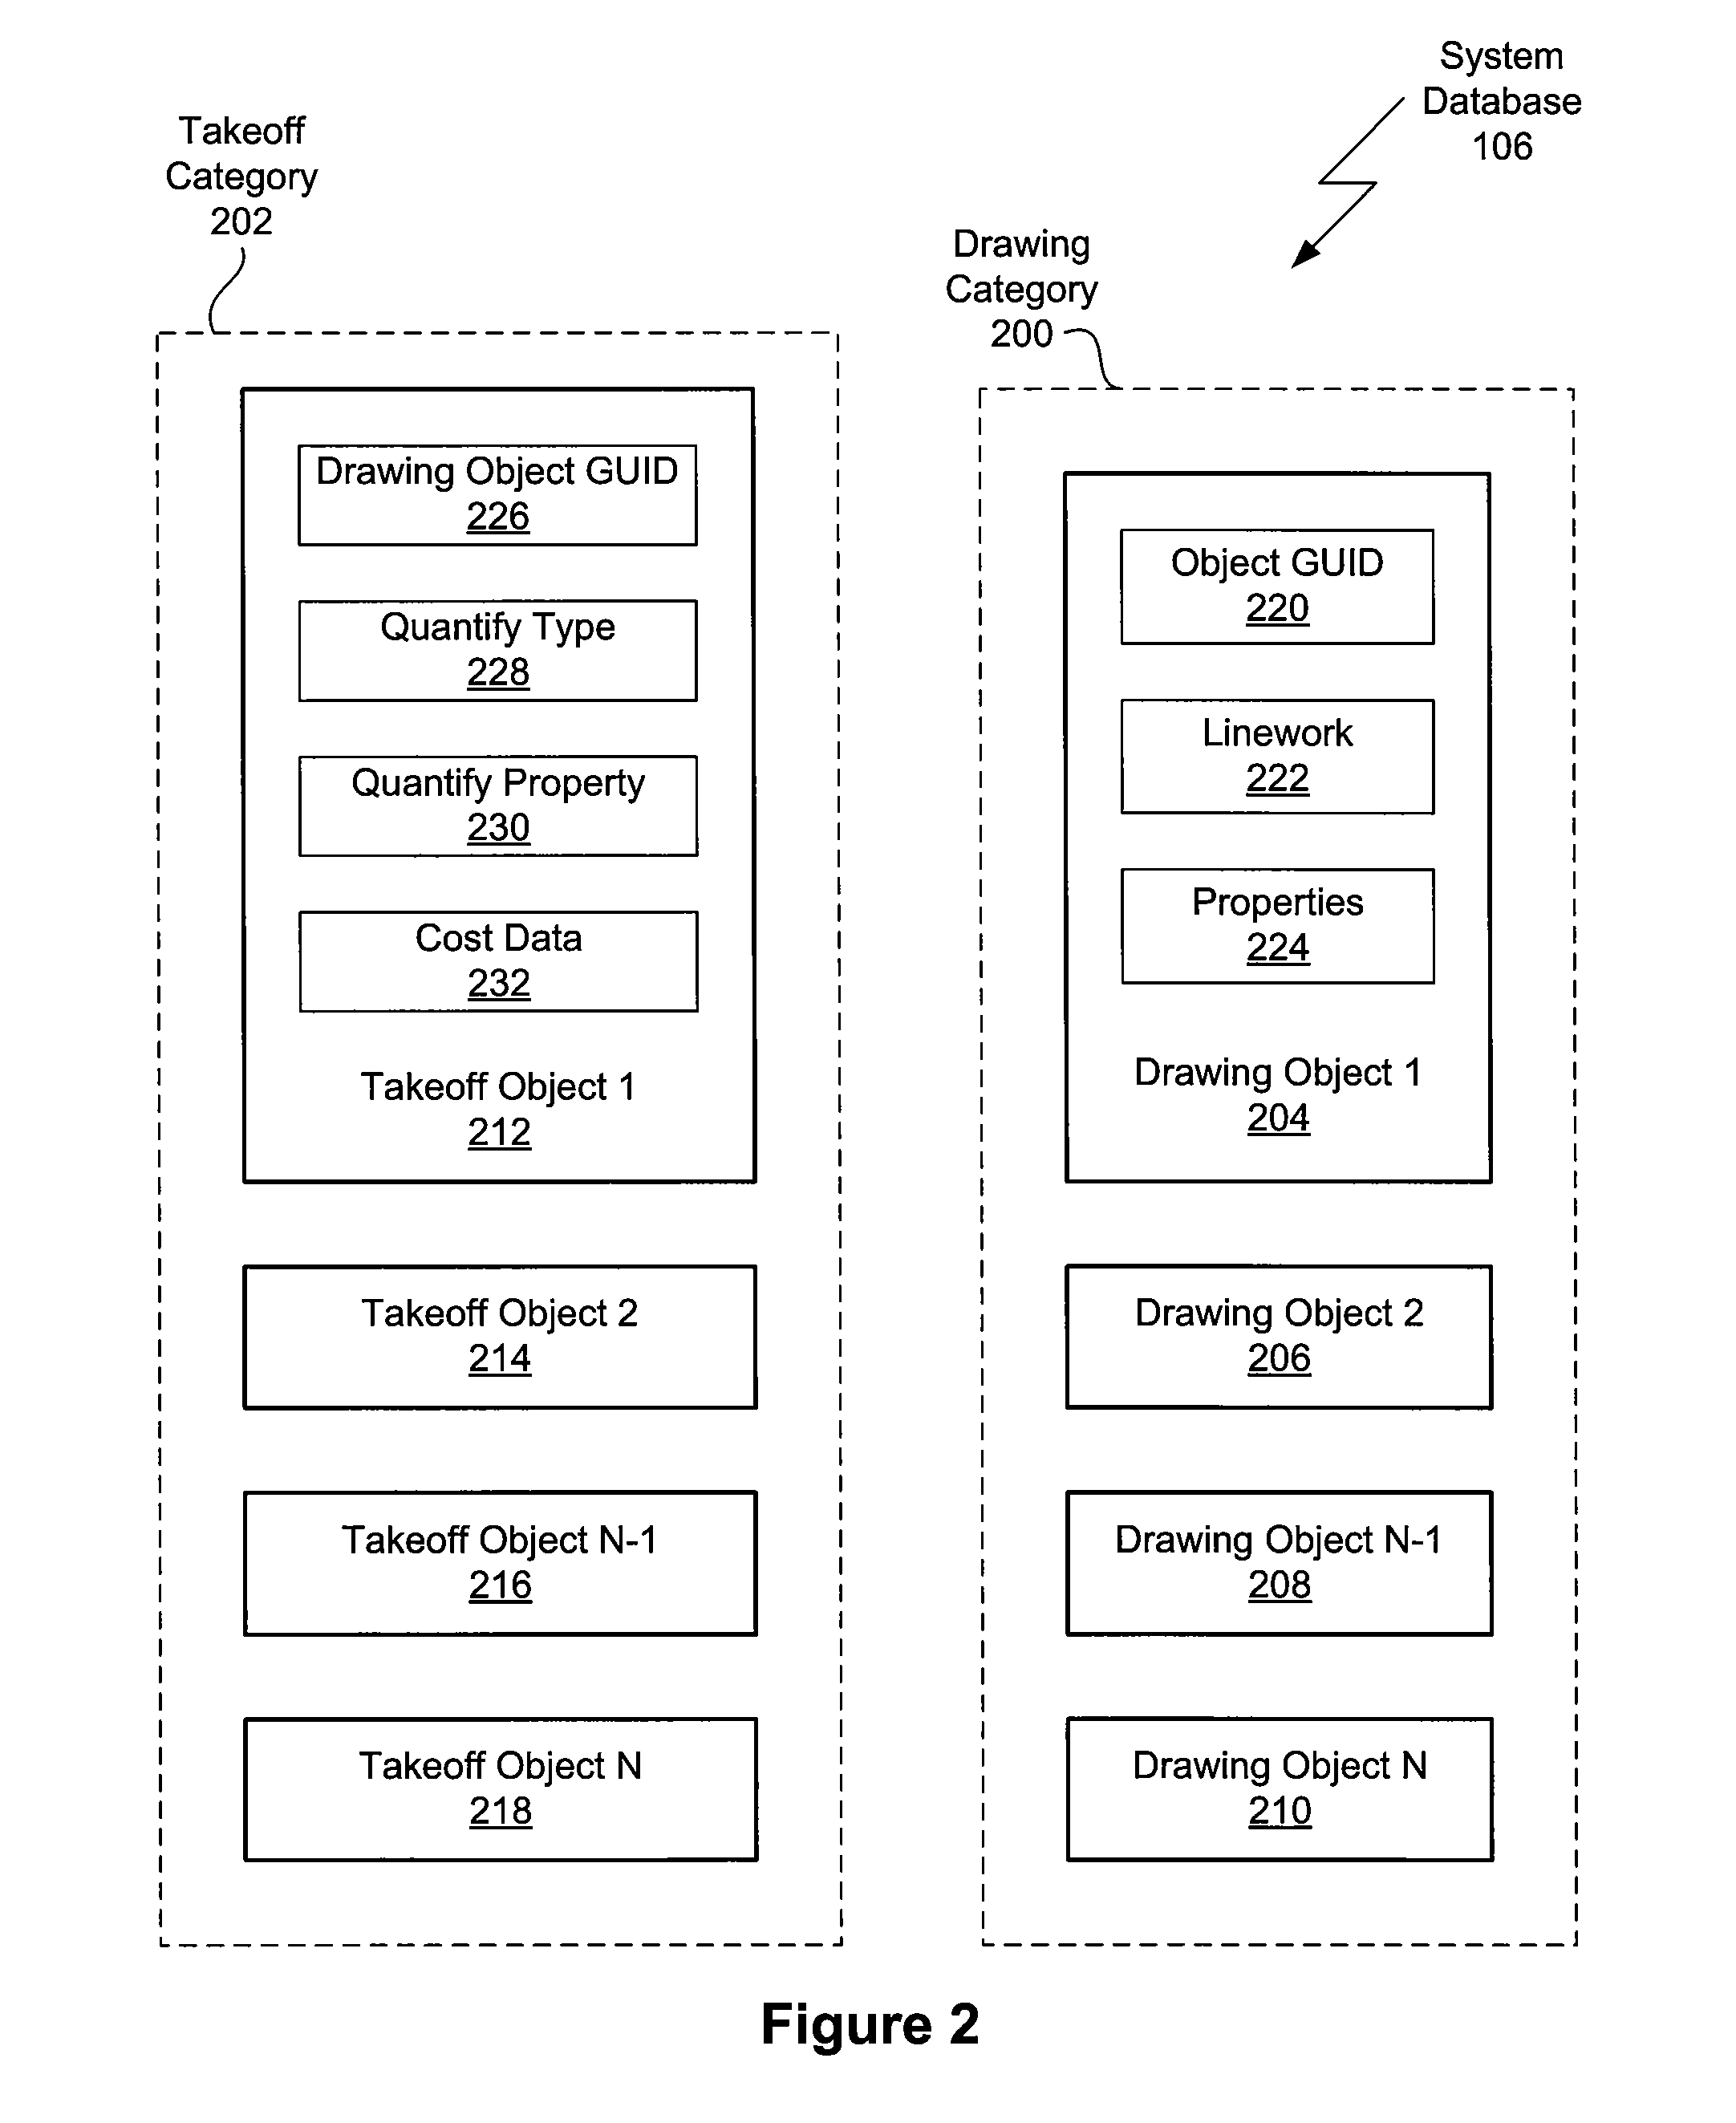 Takeoff List Palette For Guiding Semi-Automatic Quantity Takeoff From Computer Aided Design Drawings